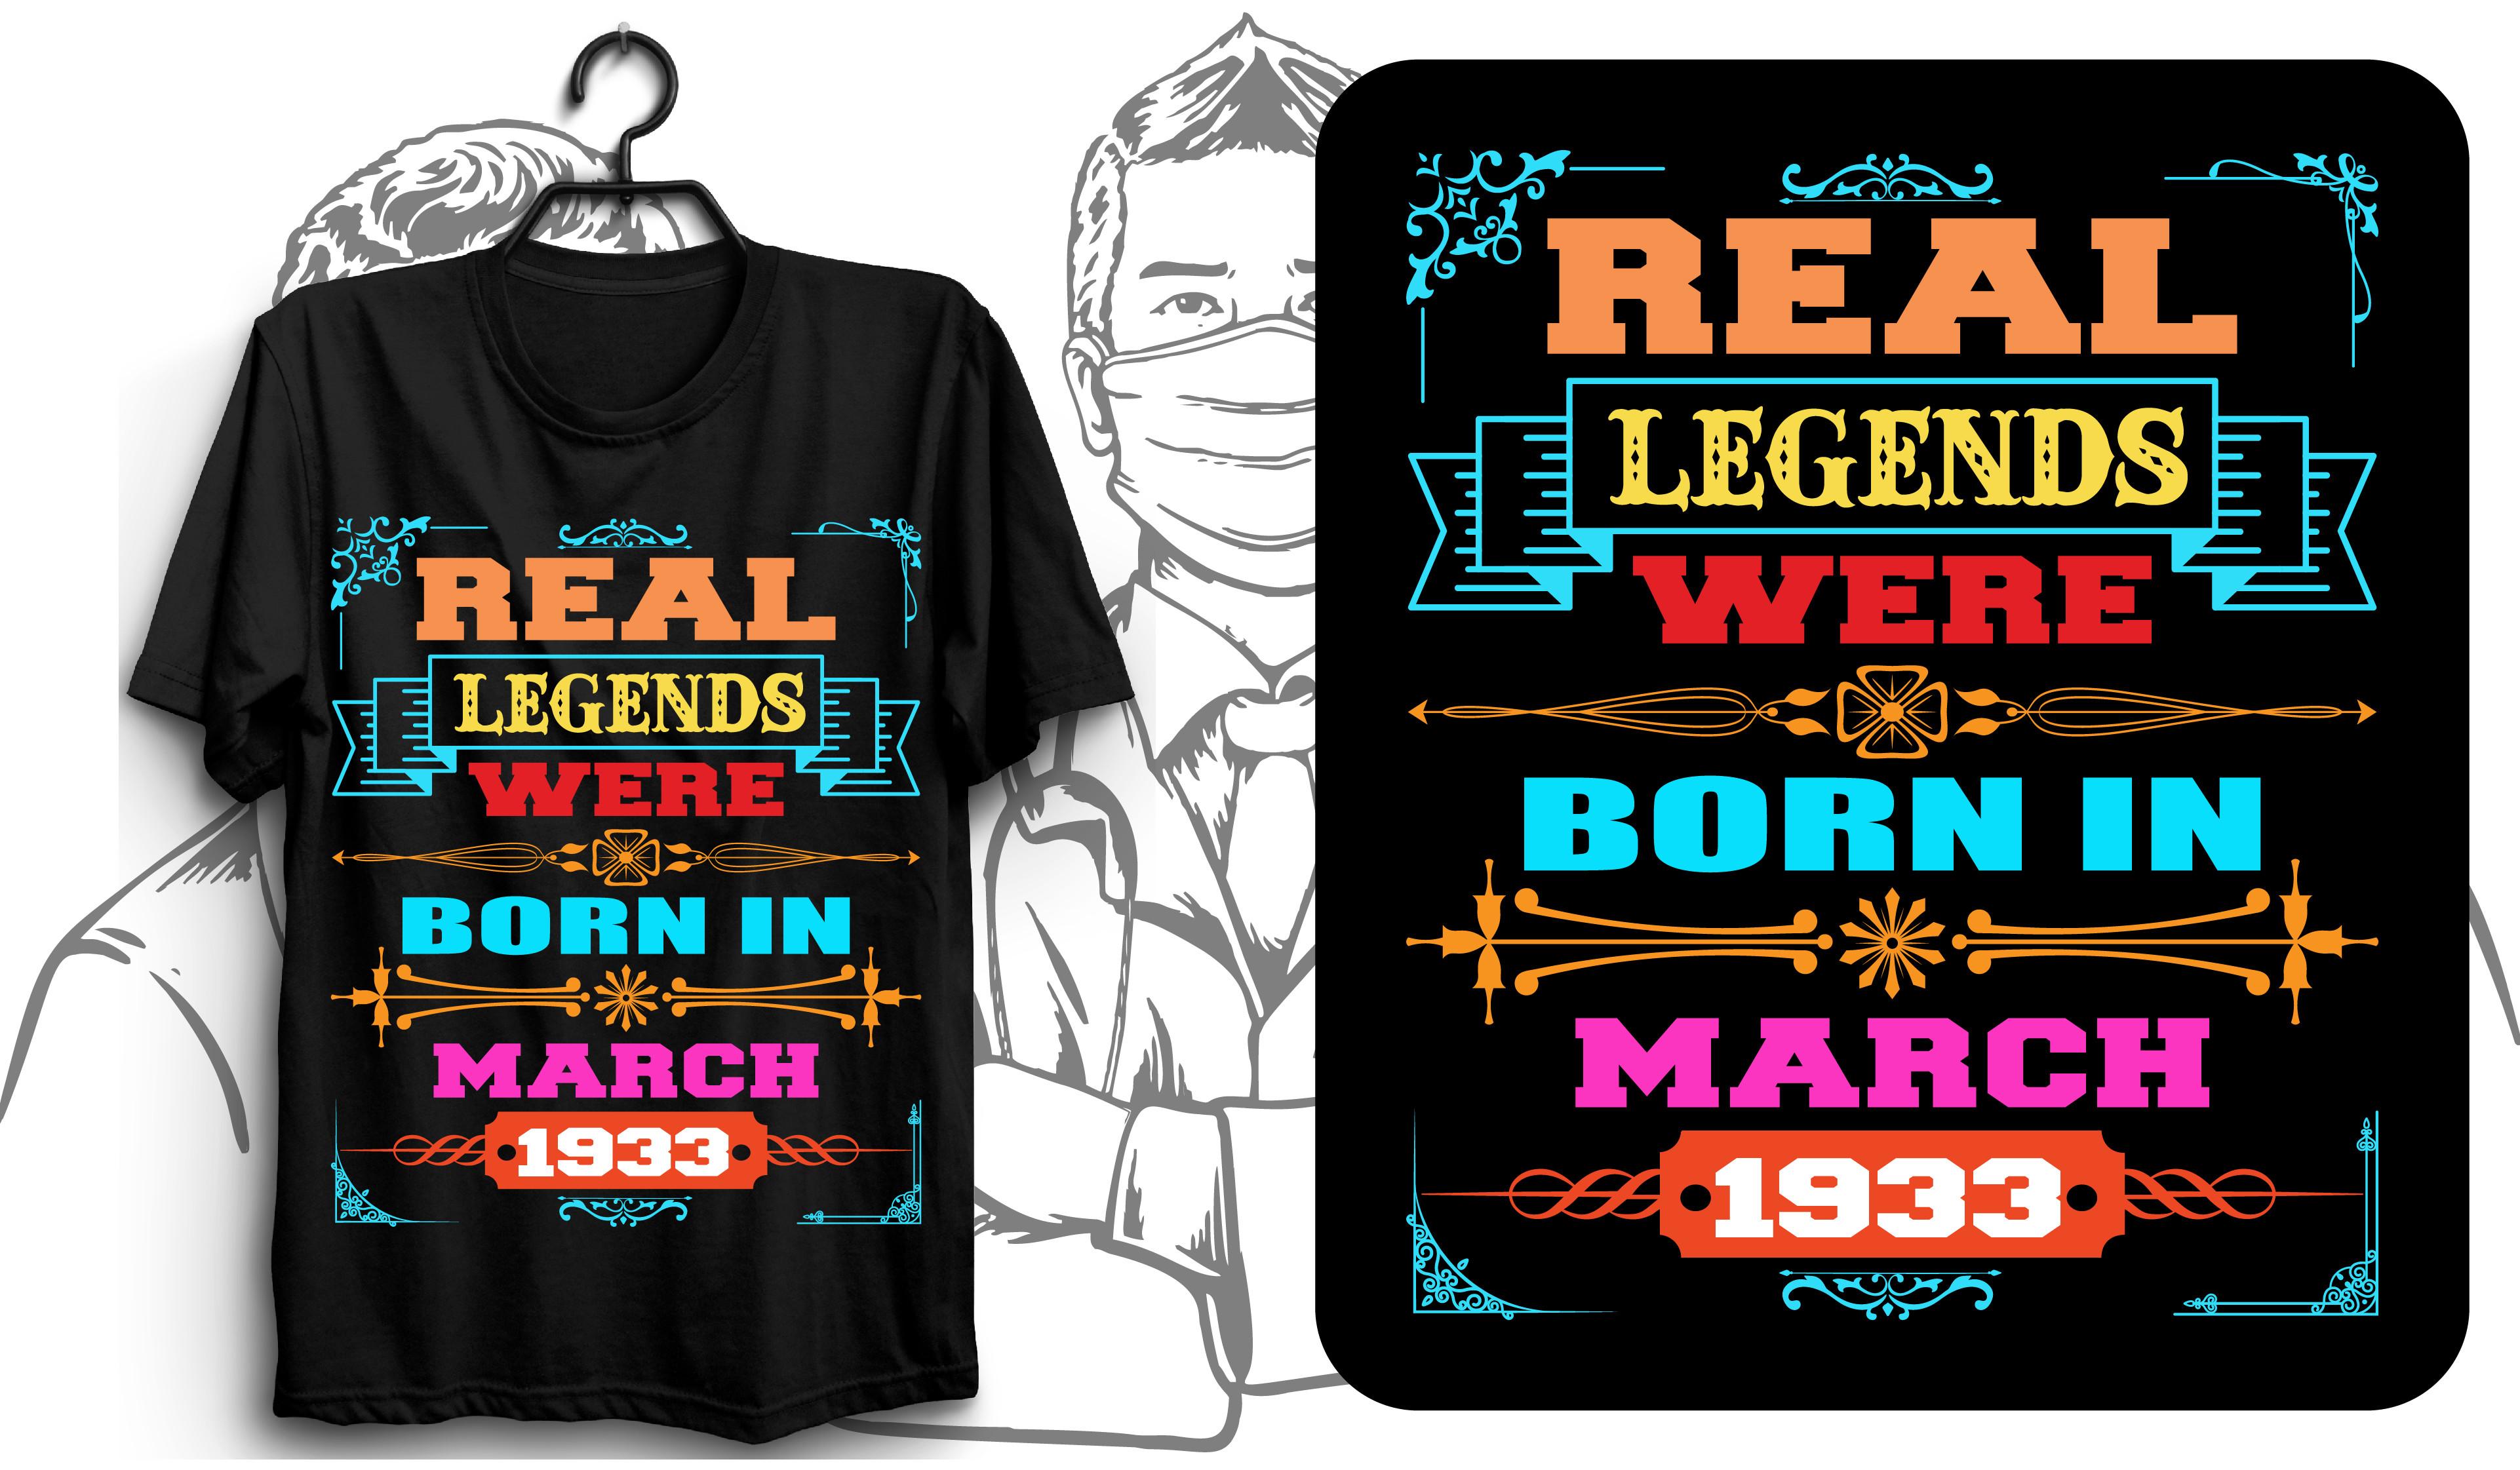 Real Legends Were Born in March 1933